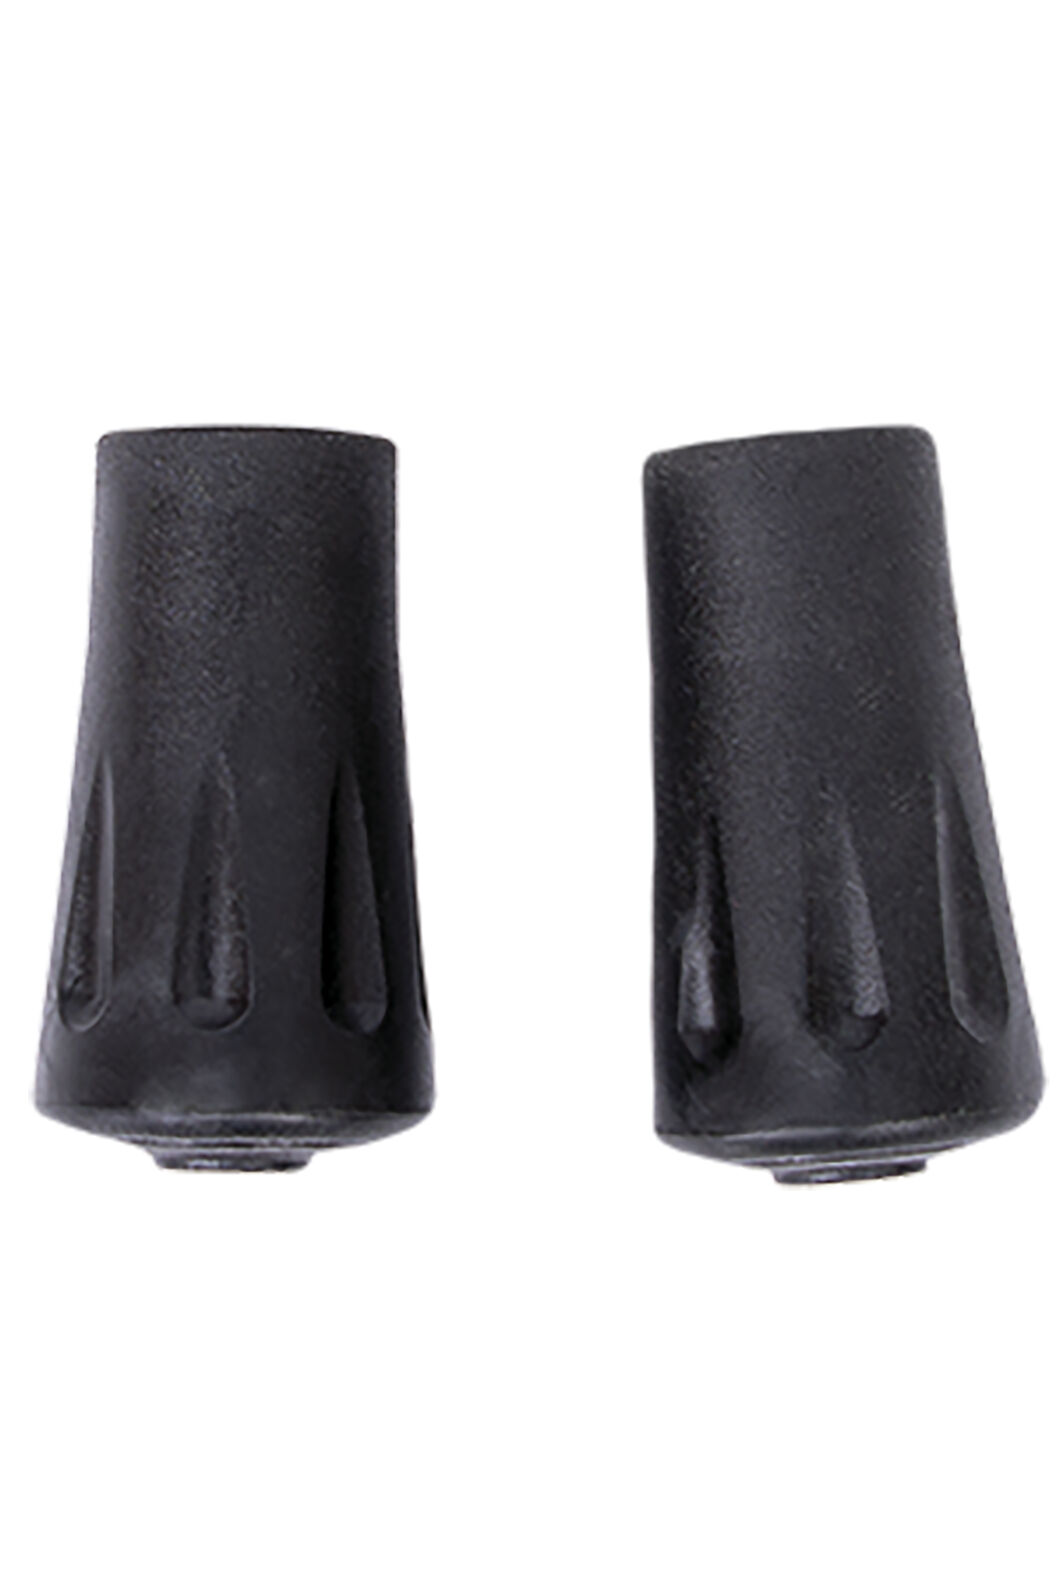 Macpac Replacement Walking Pole Tips, None, hi-res